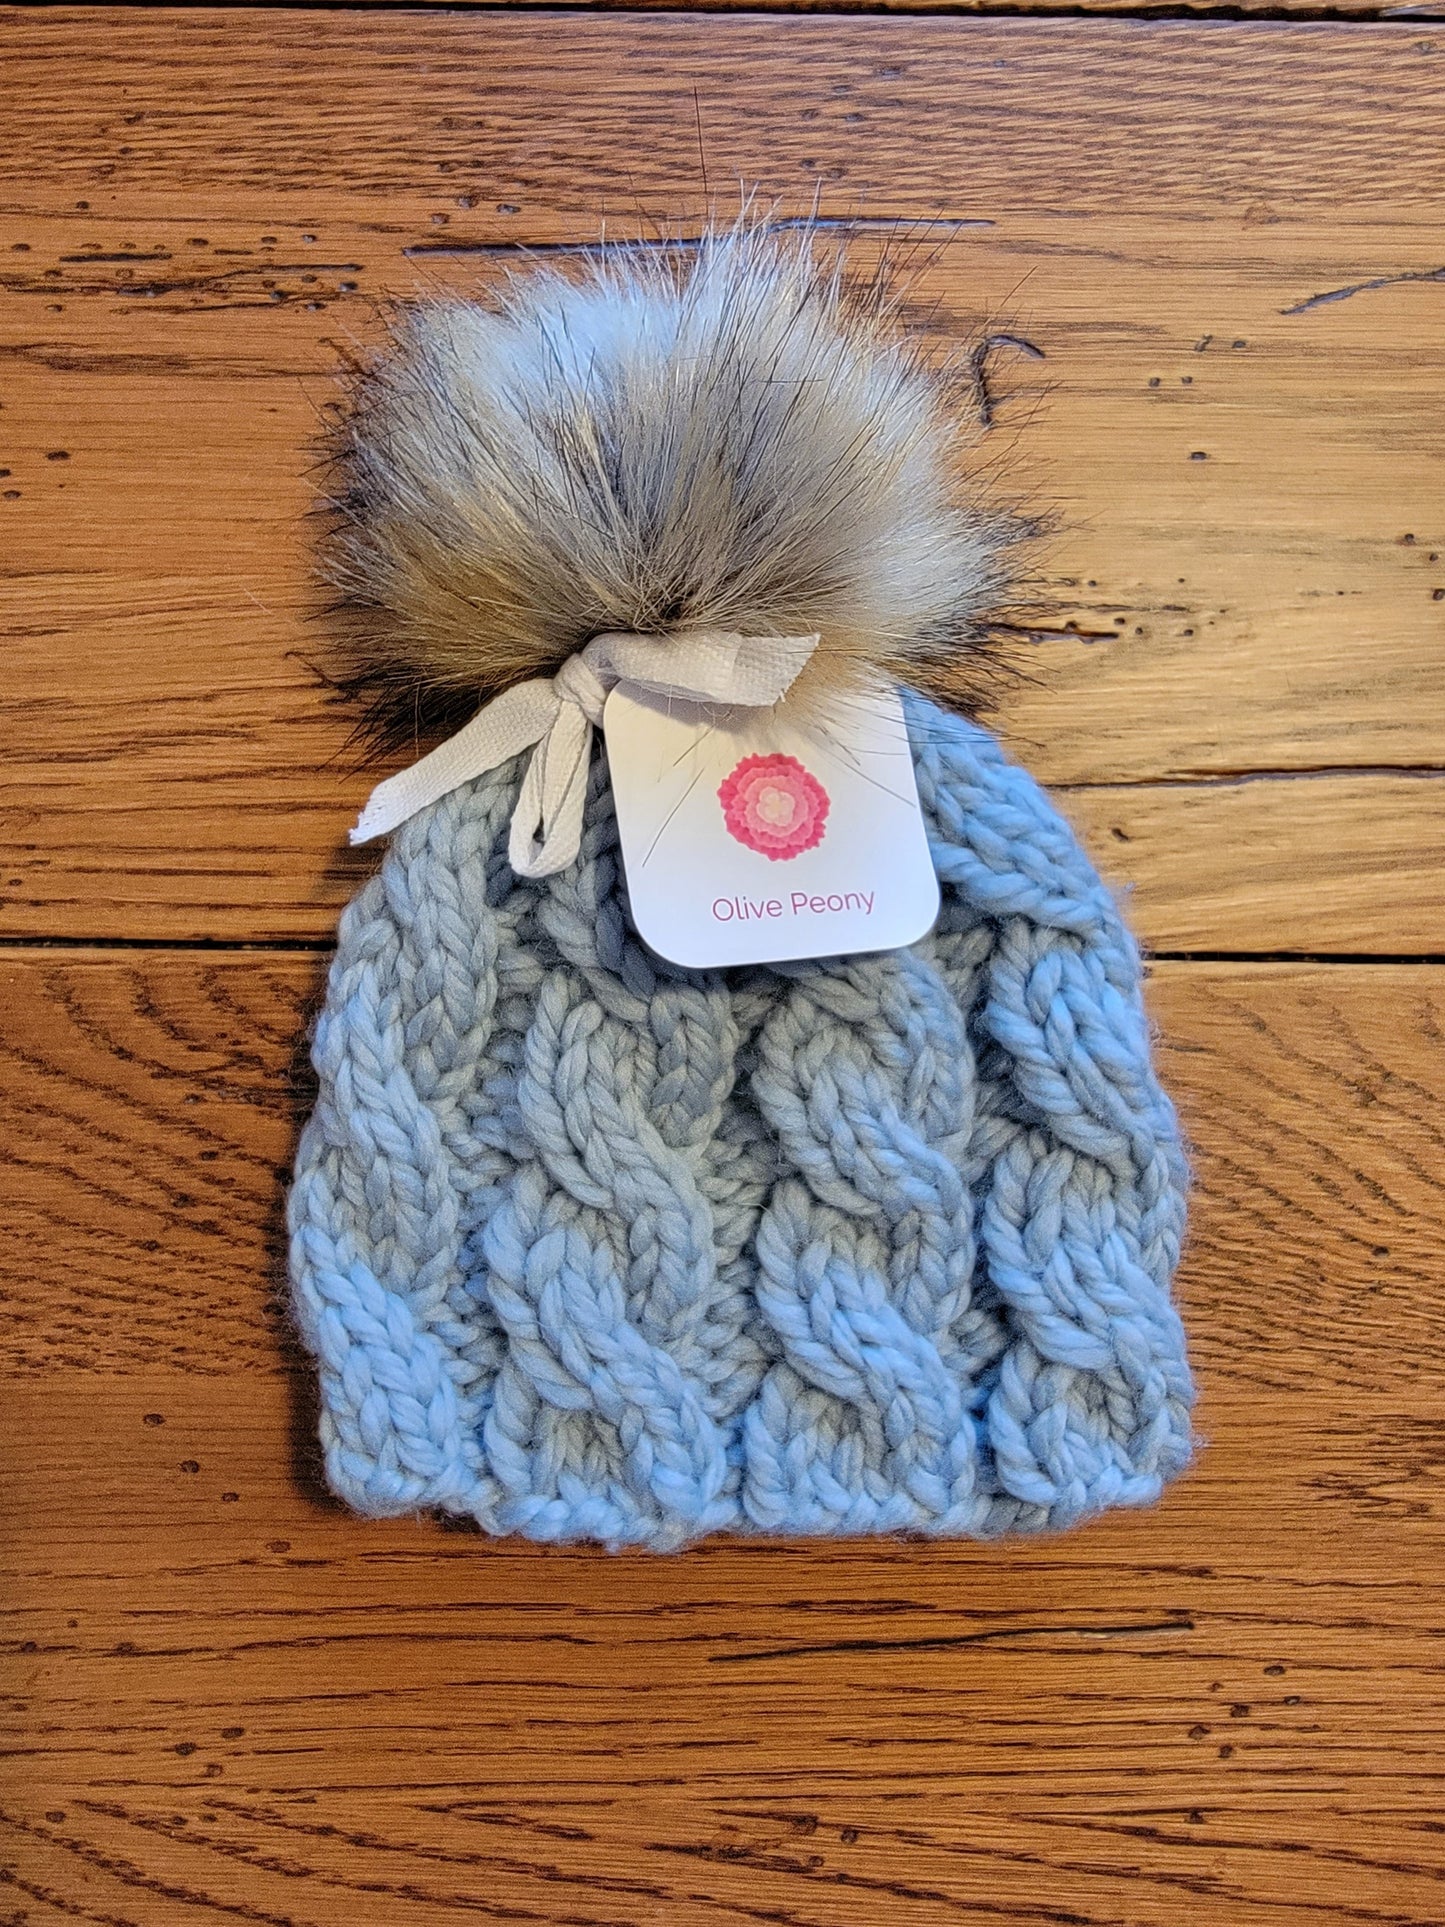 Olive Peony Wool Baby Cables Hats